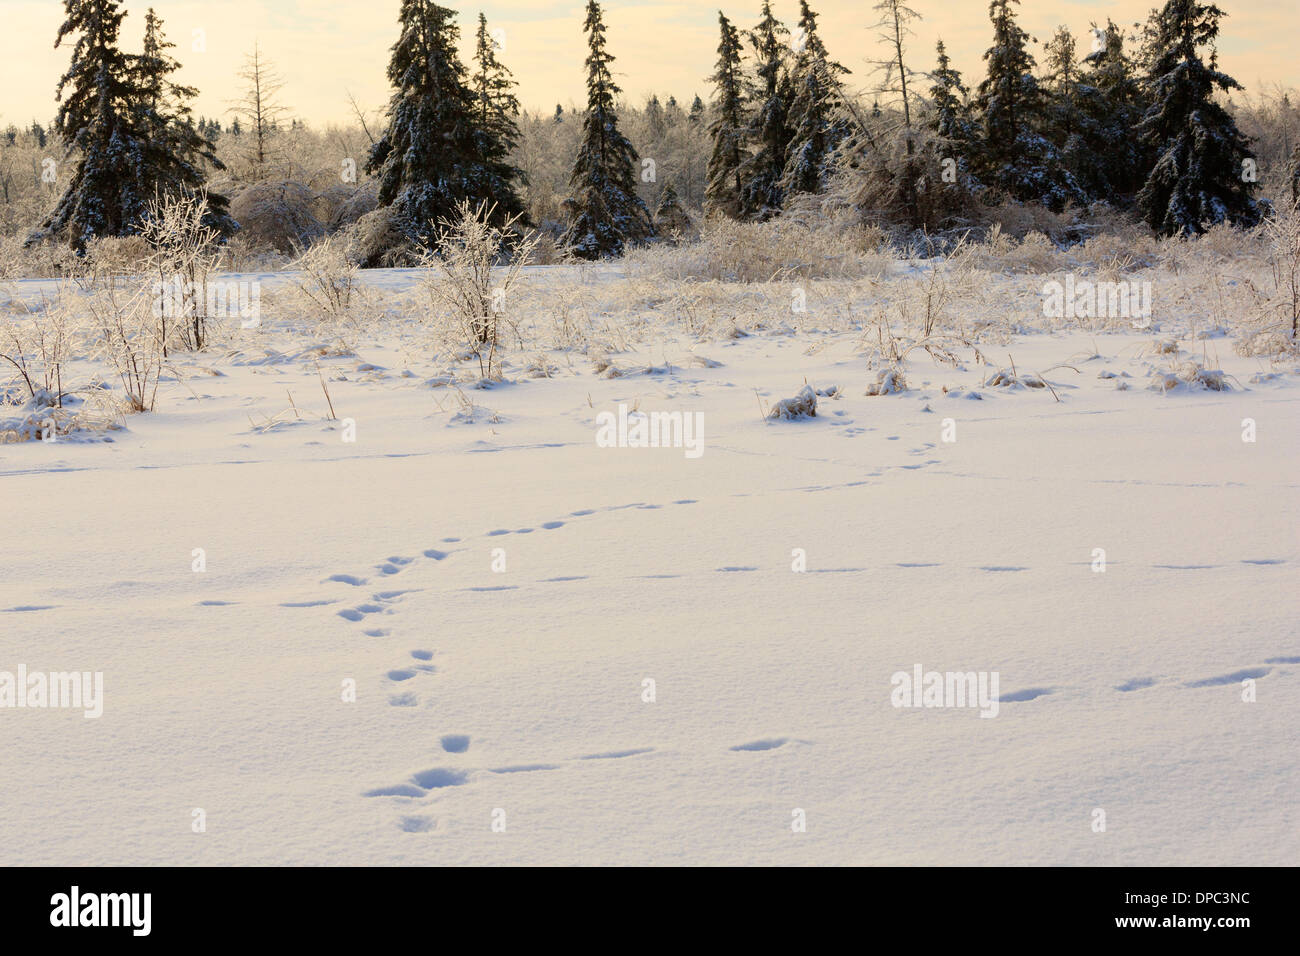 Footprints in fresh snow after a winter storm in Southern Ontario. Ice coats shrubs and grasses in Presqu'ile Provincial Park. Stock Photo